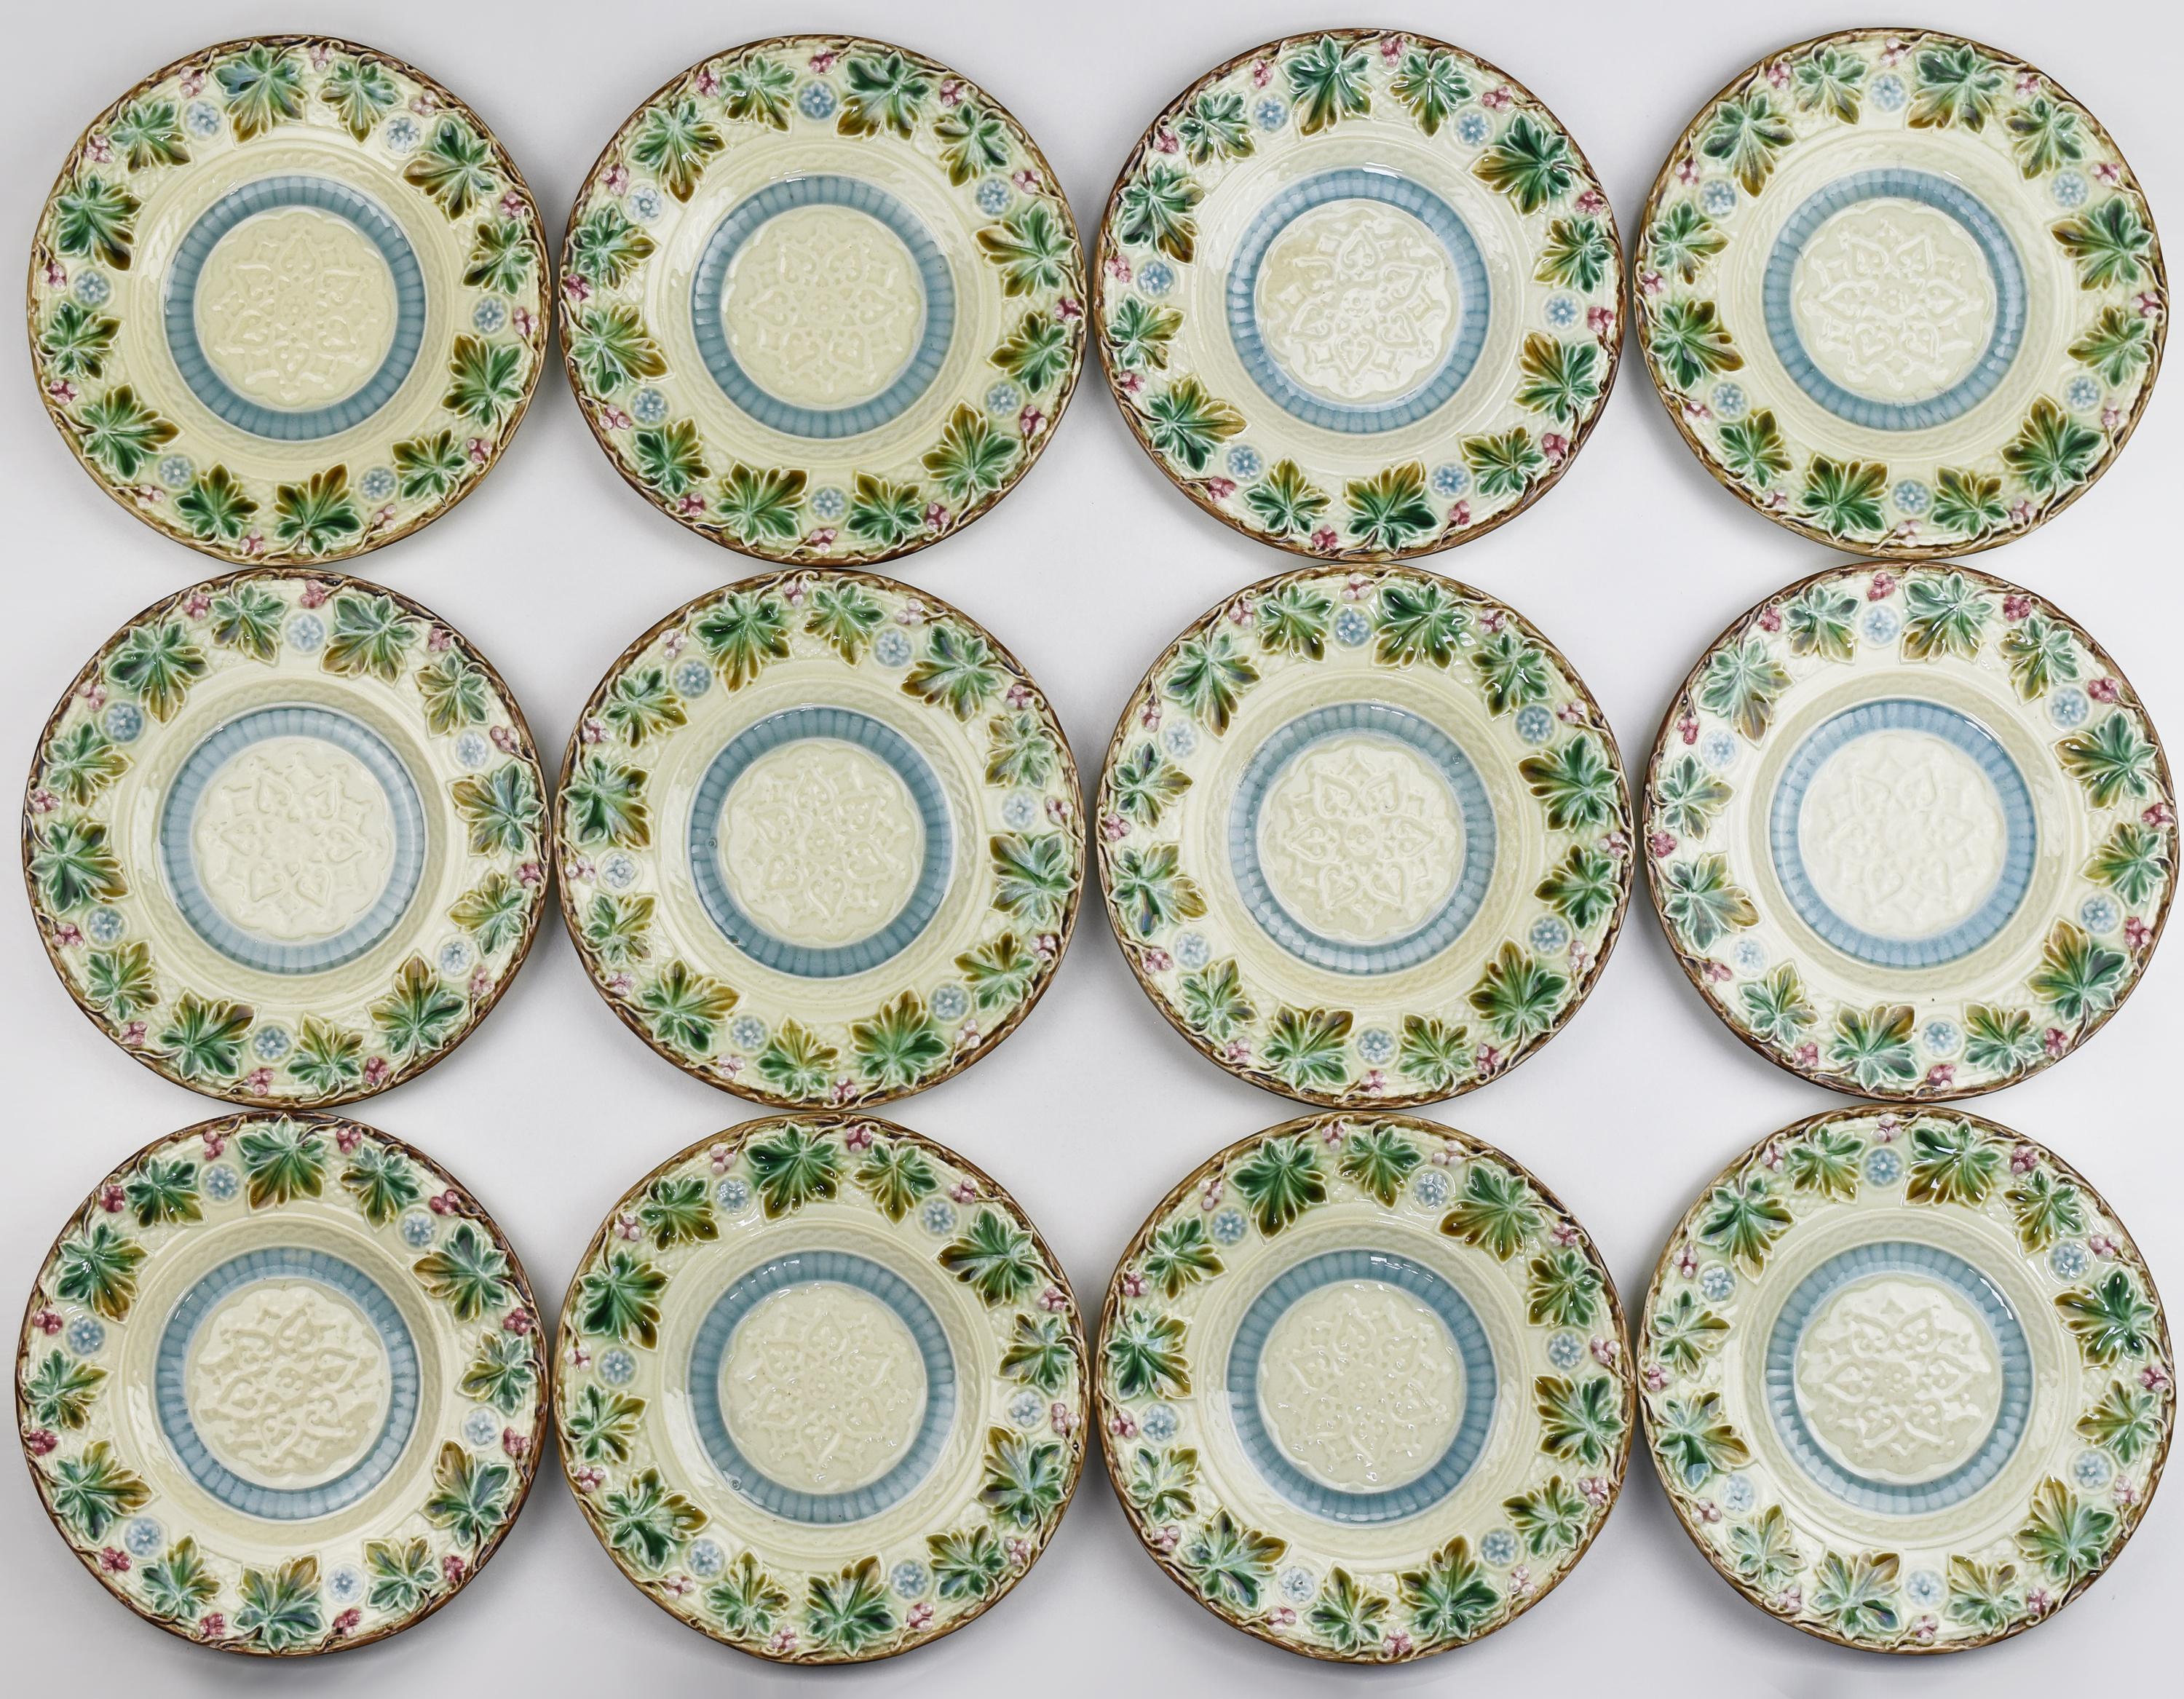 Antique Art Nouveau full set of 12 side dishes / dessert majolica plates by sarreguemines decorated with a wild wine leaves and grapes pattern in fantastic condition.

All pieces are unmarked but definitely made by Sarreguemines probably for